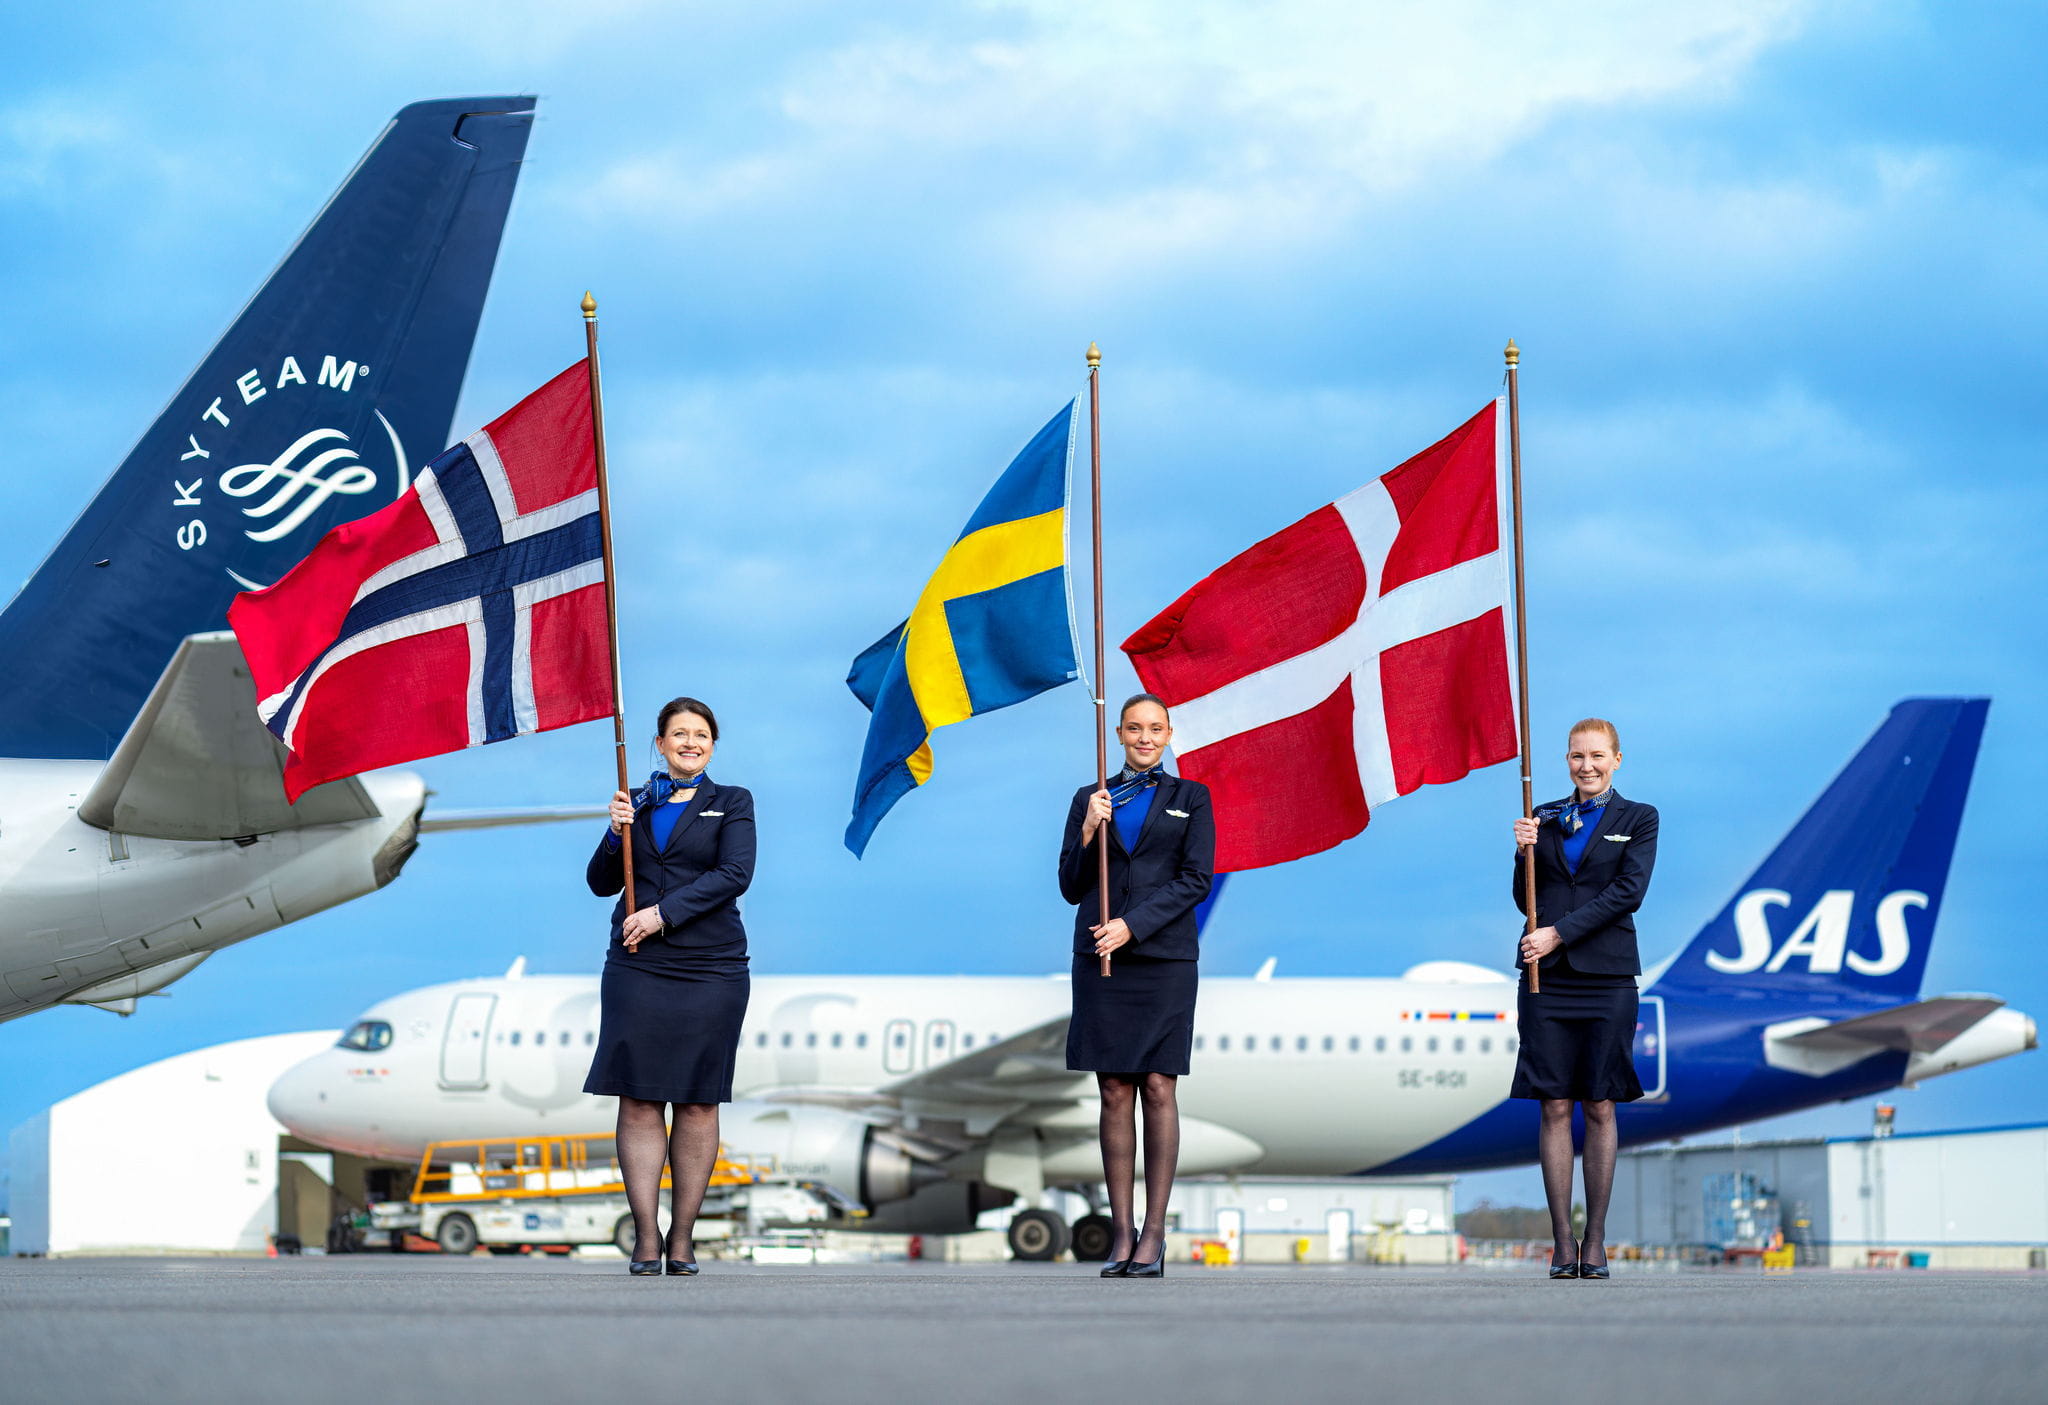 SkyTeam and SAS airplane tails, with employees holding flags.